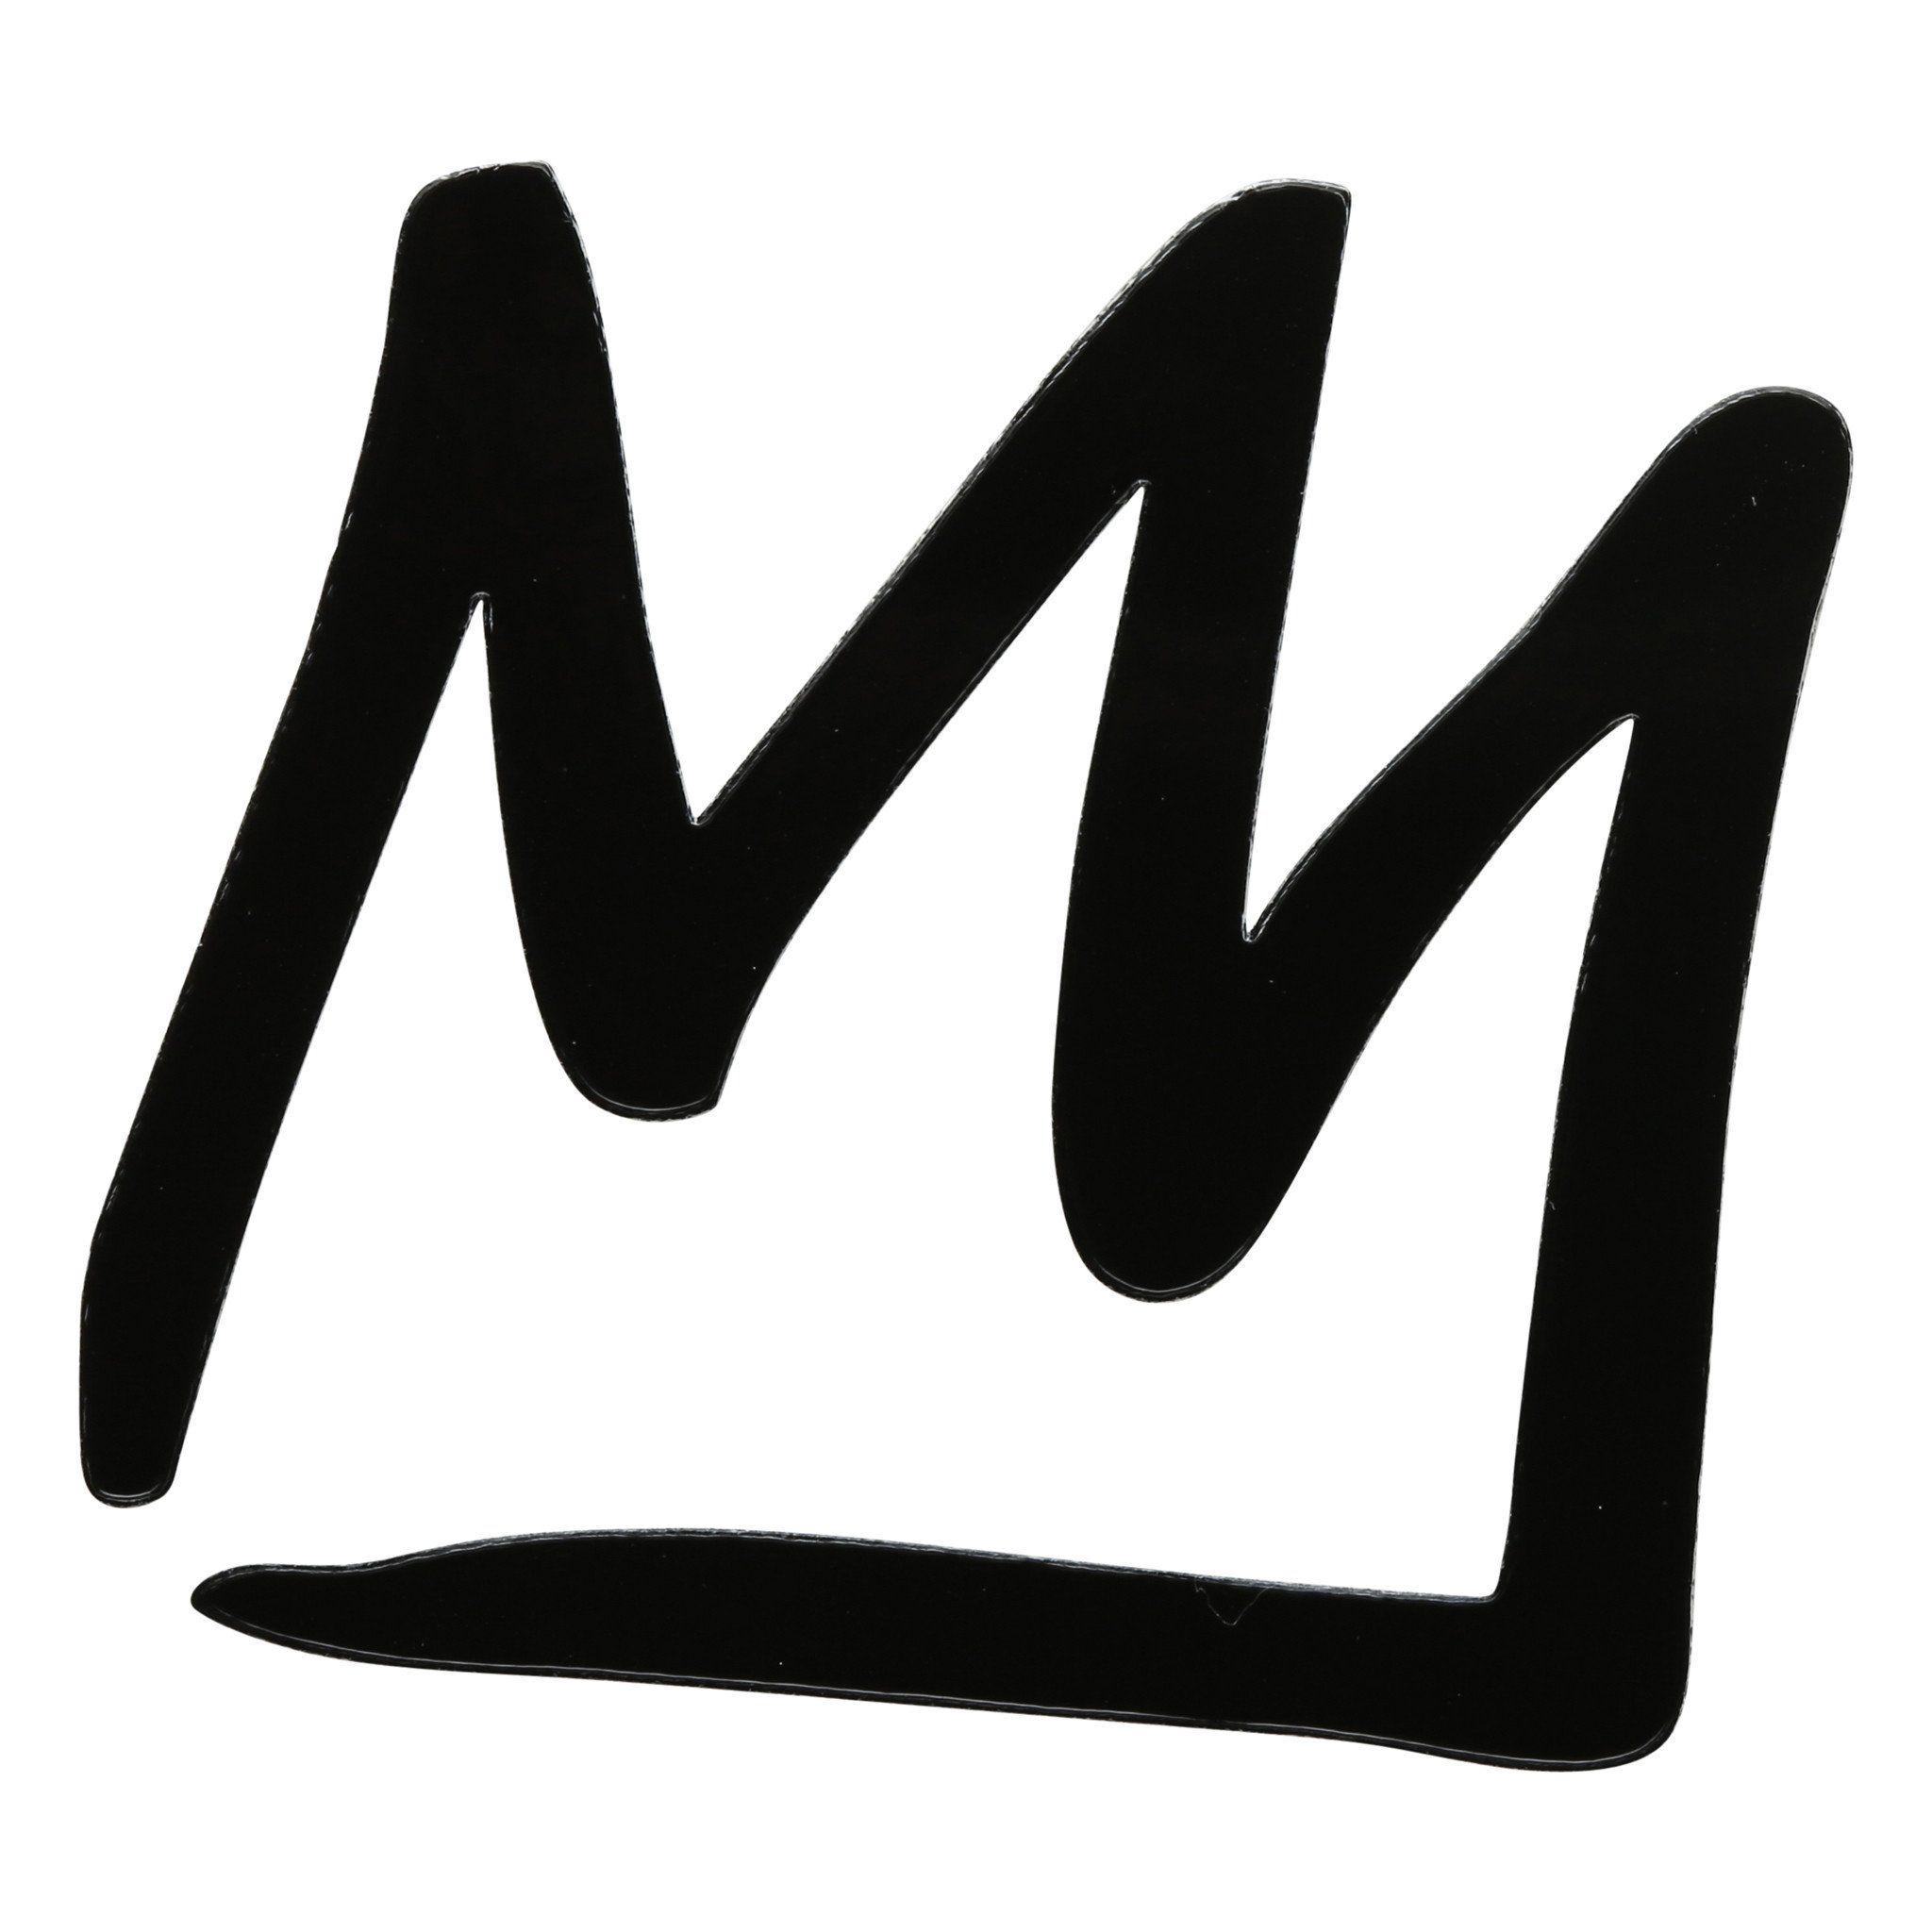 Black and White Crown Logo - Mammoth Crown 4 Stickers (Pack of 5)